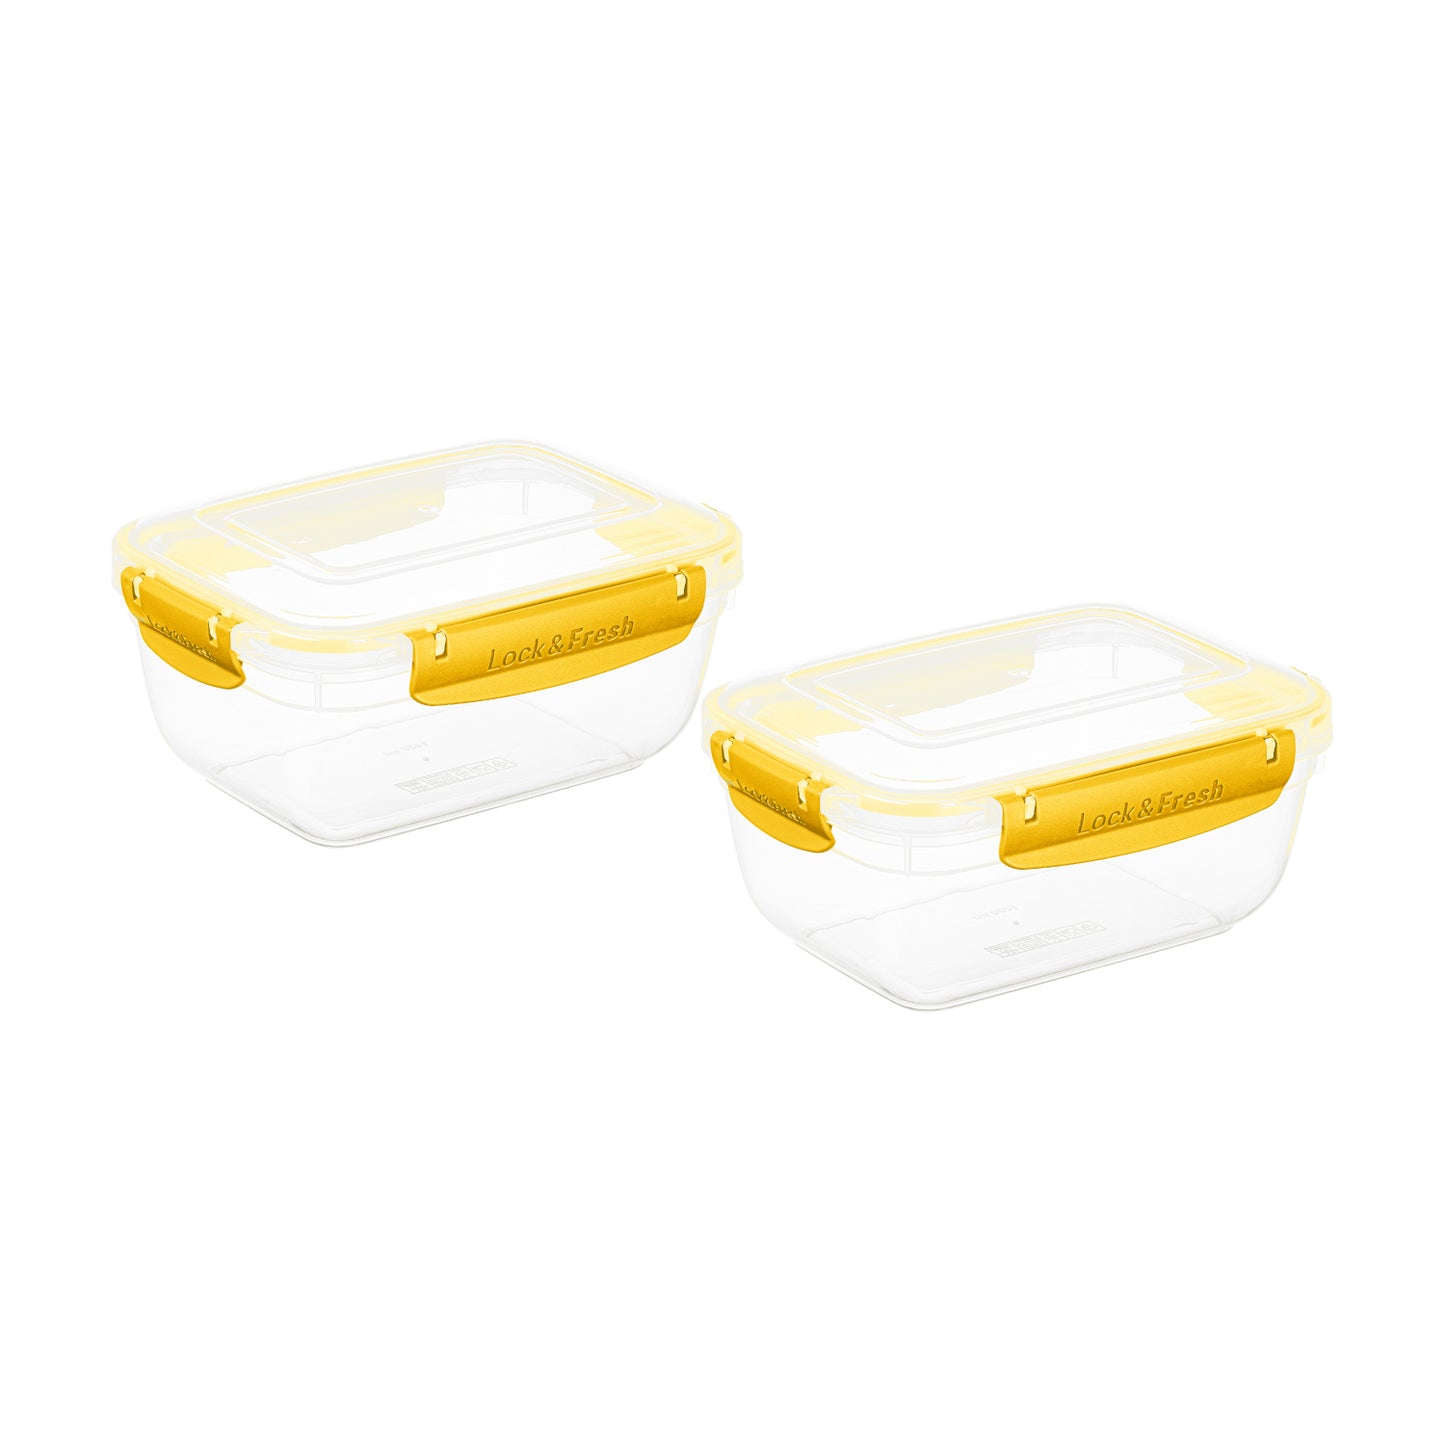 48 oz. Sealed Container, 2 Pack